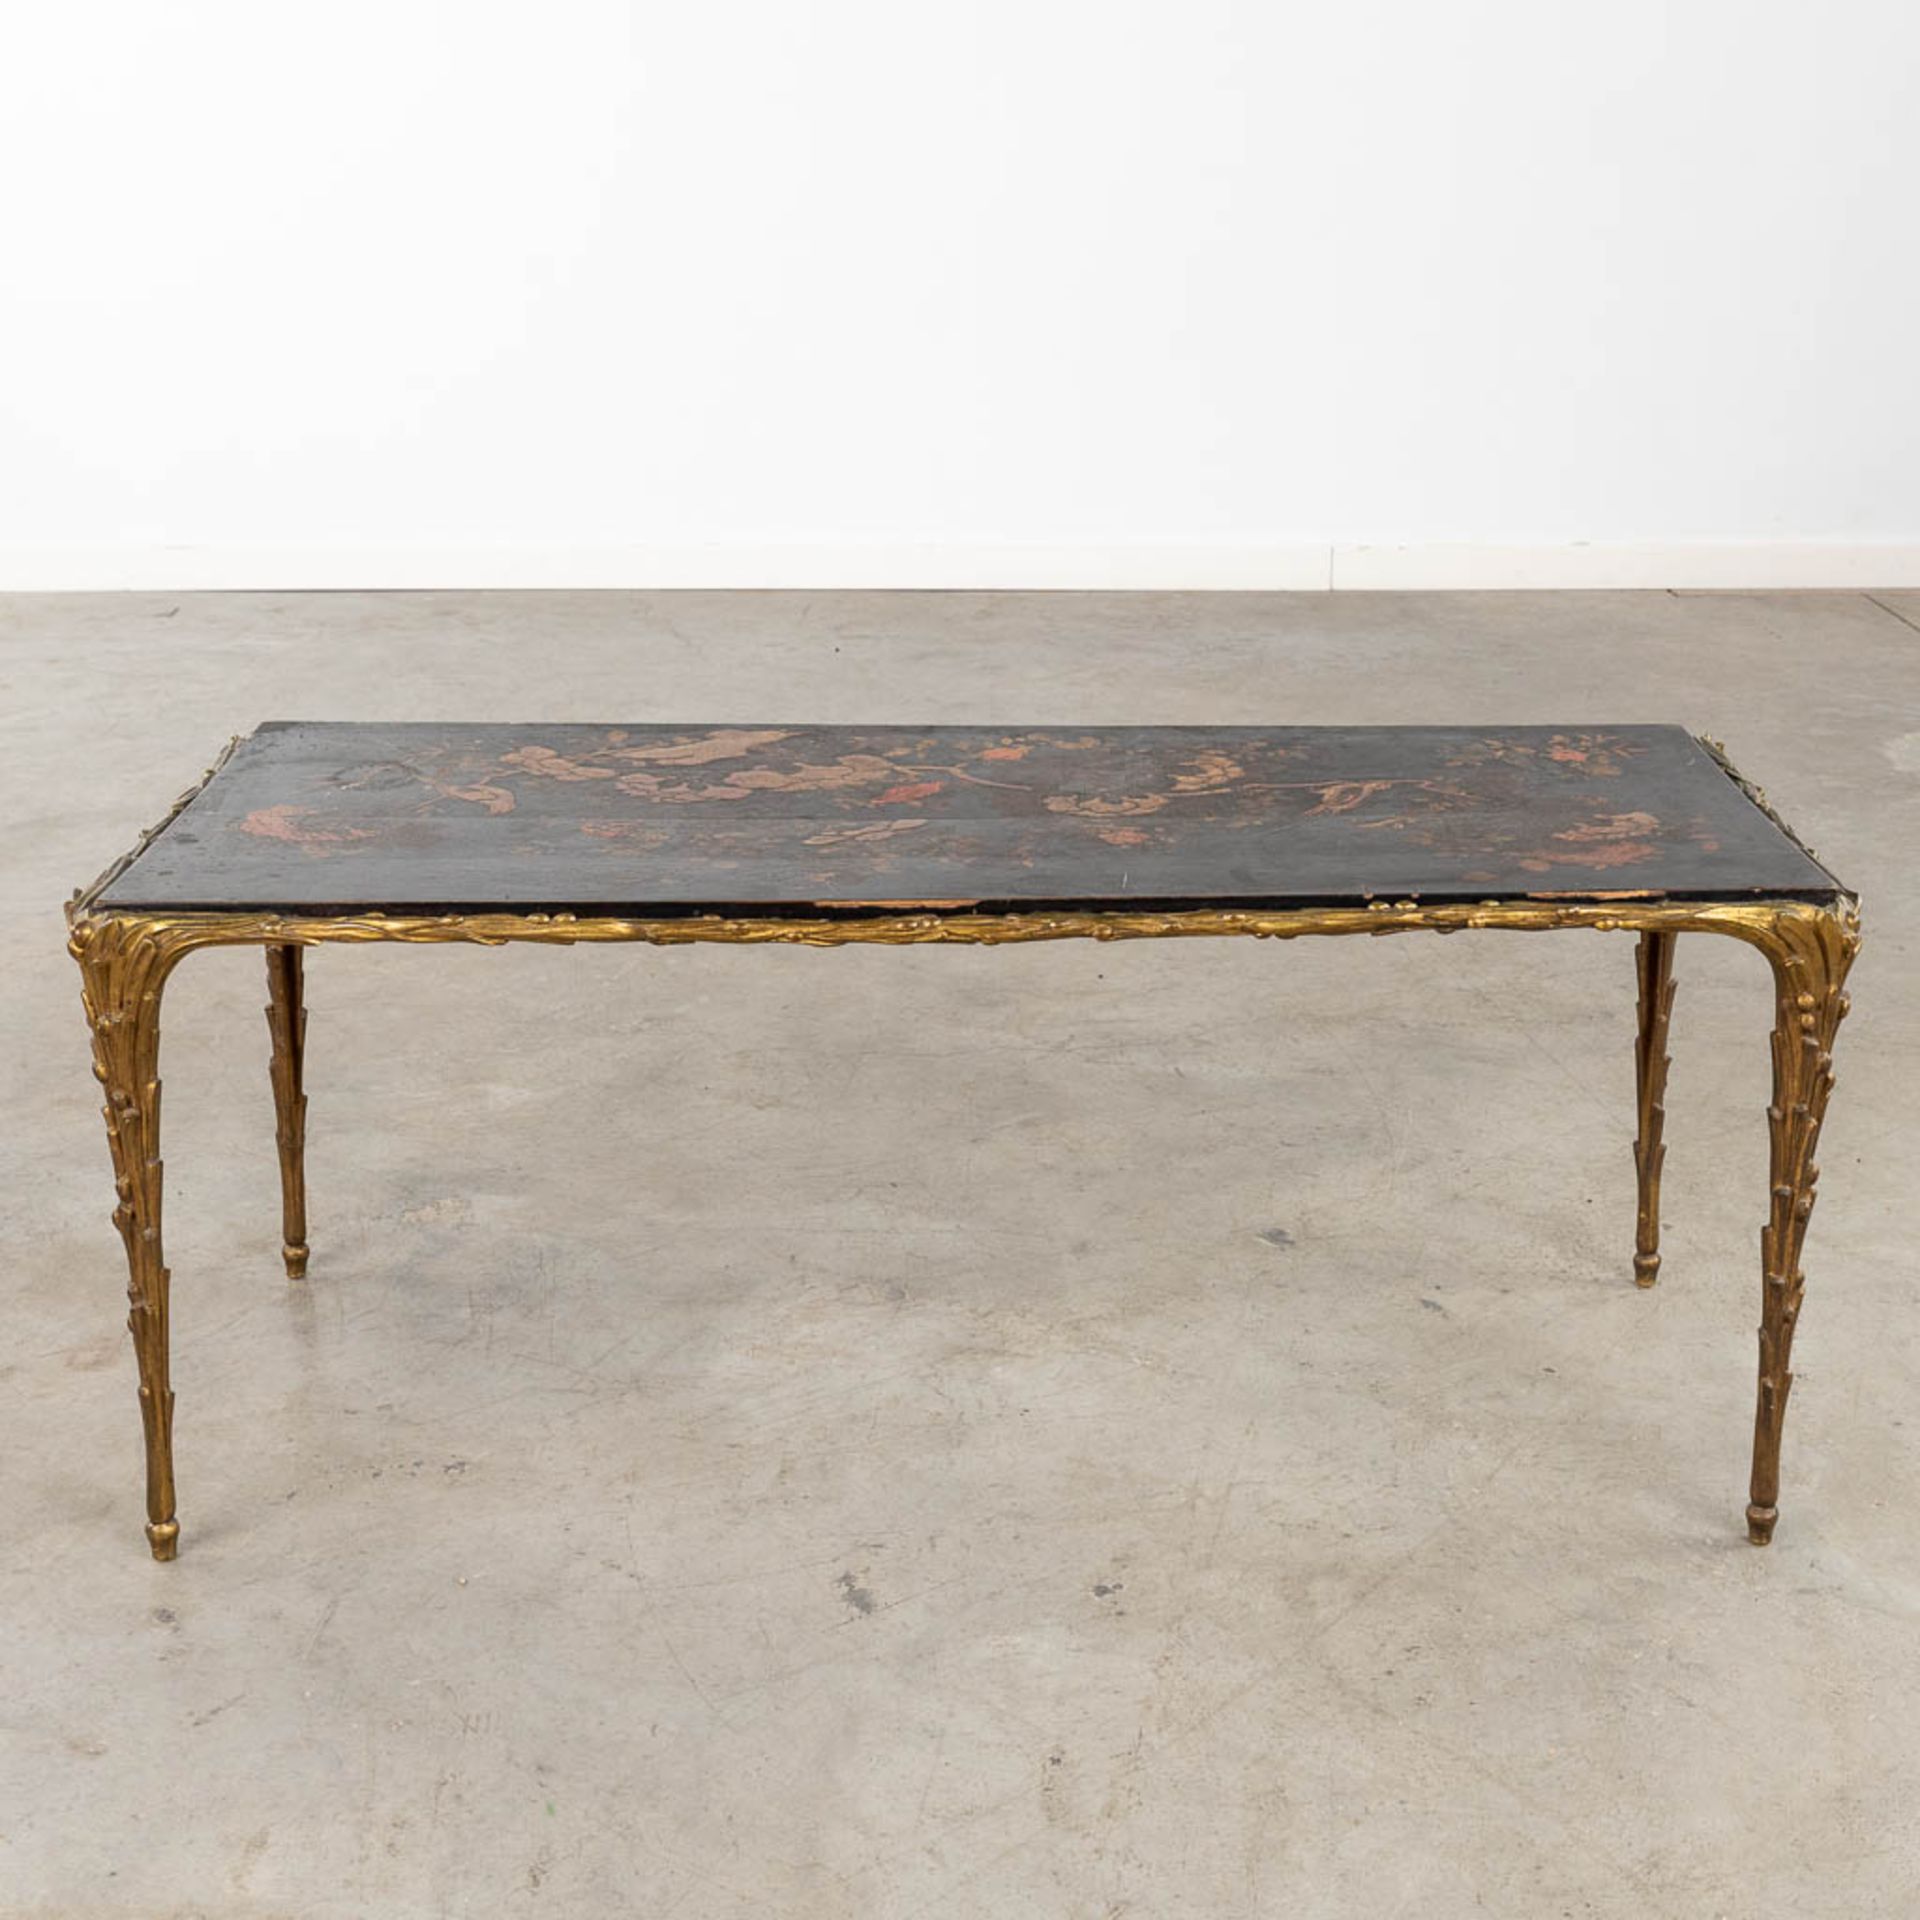 Maison Bagues 'Mid-Century Coffee Table' with lacquered Chinoiserie decor. (D:43 x W:100 x H:42 cm) - Image 3 of 20